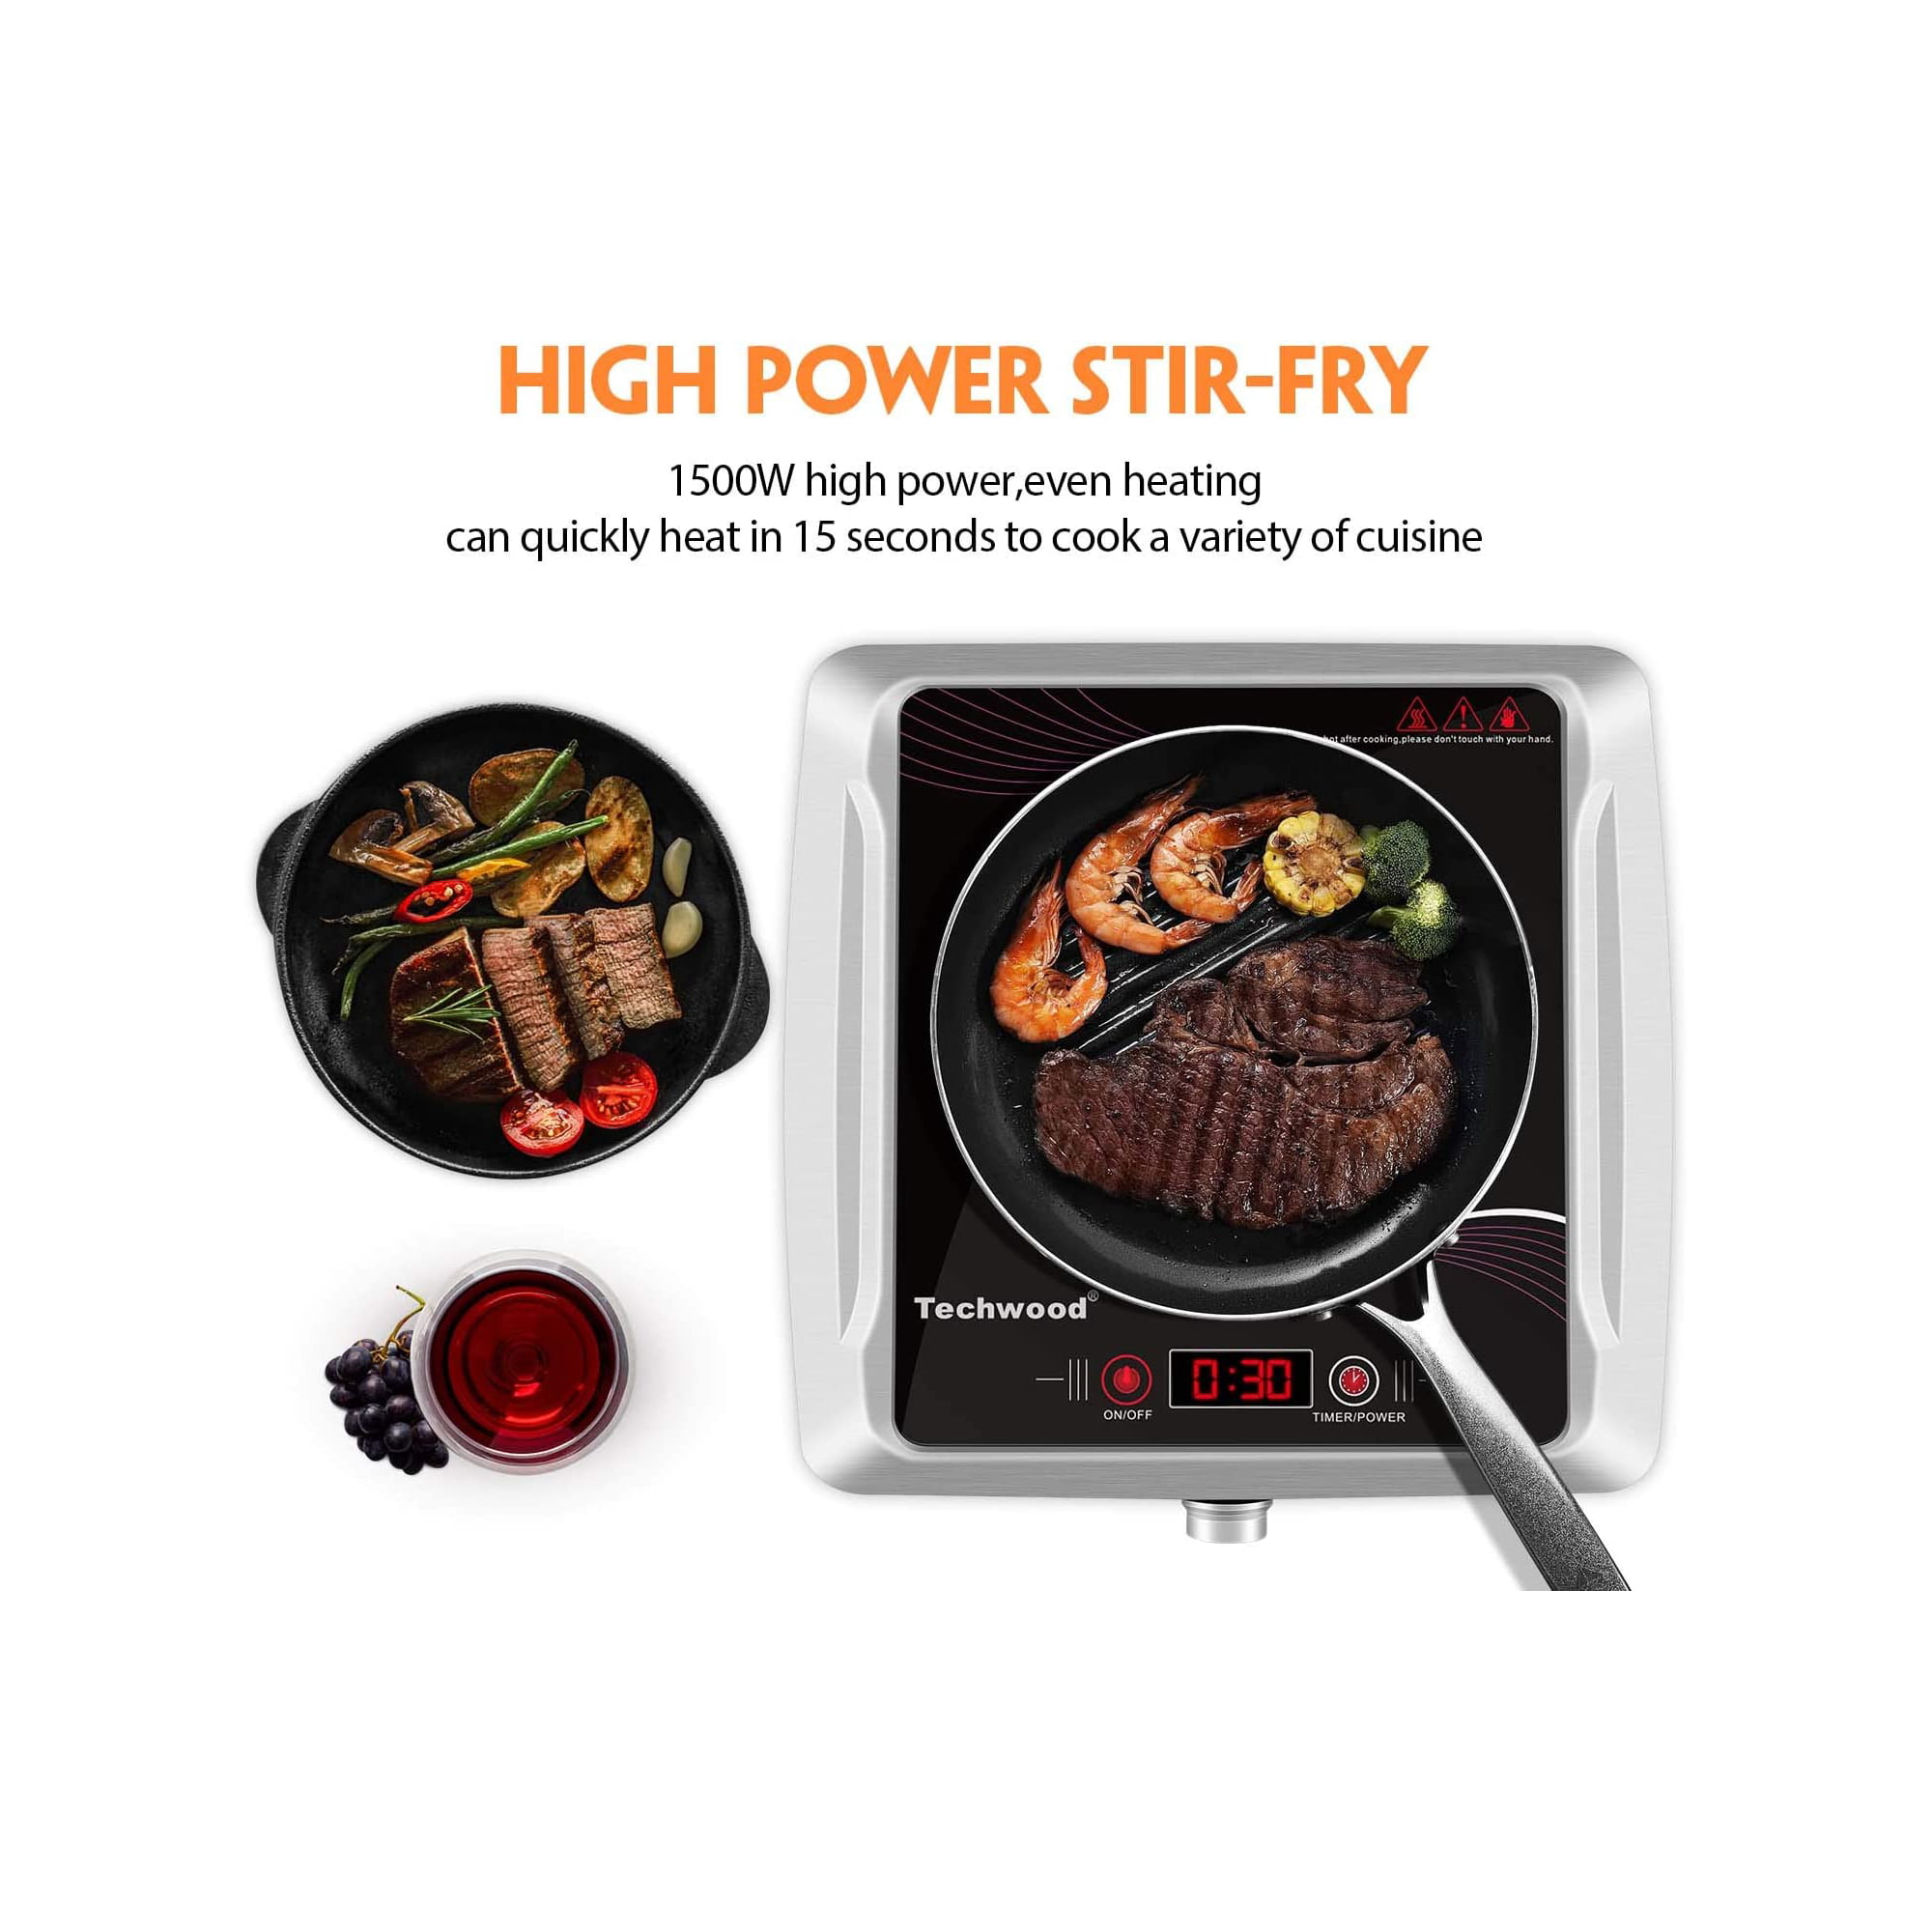 https://themarketdepot.com/wp-content/uploads/2023/01/Techwood-Hot-Plate-Electric-Stove-Single-Burner-Countertop-Infrared-Ceramic-Cooktop-1500W-Portable-Ceramic-Glass-Stainless-Steel-4.jpeg